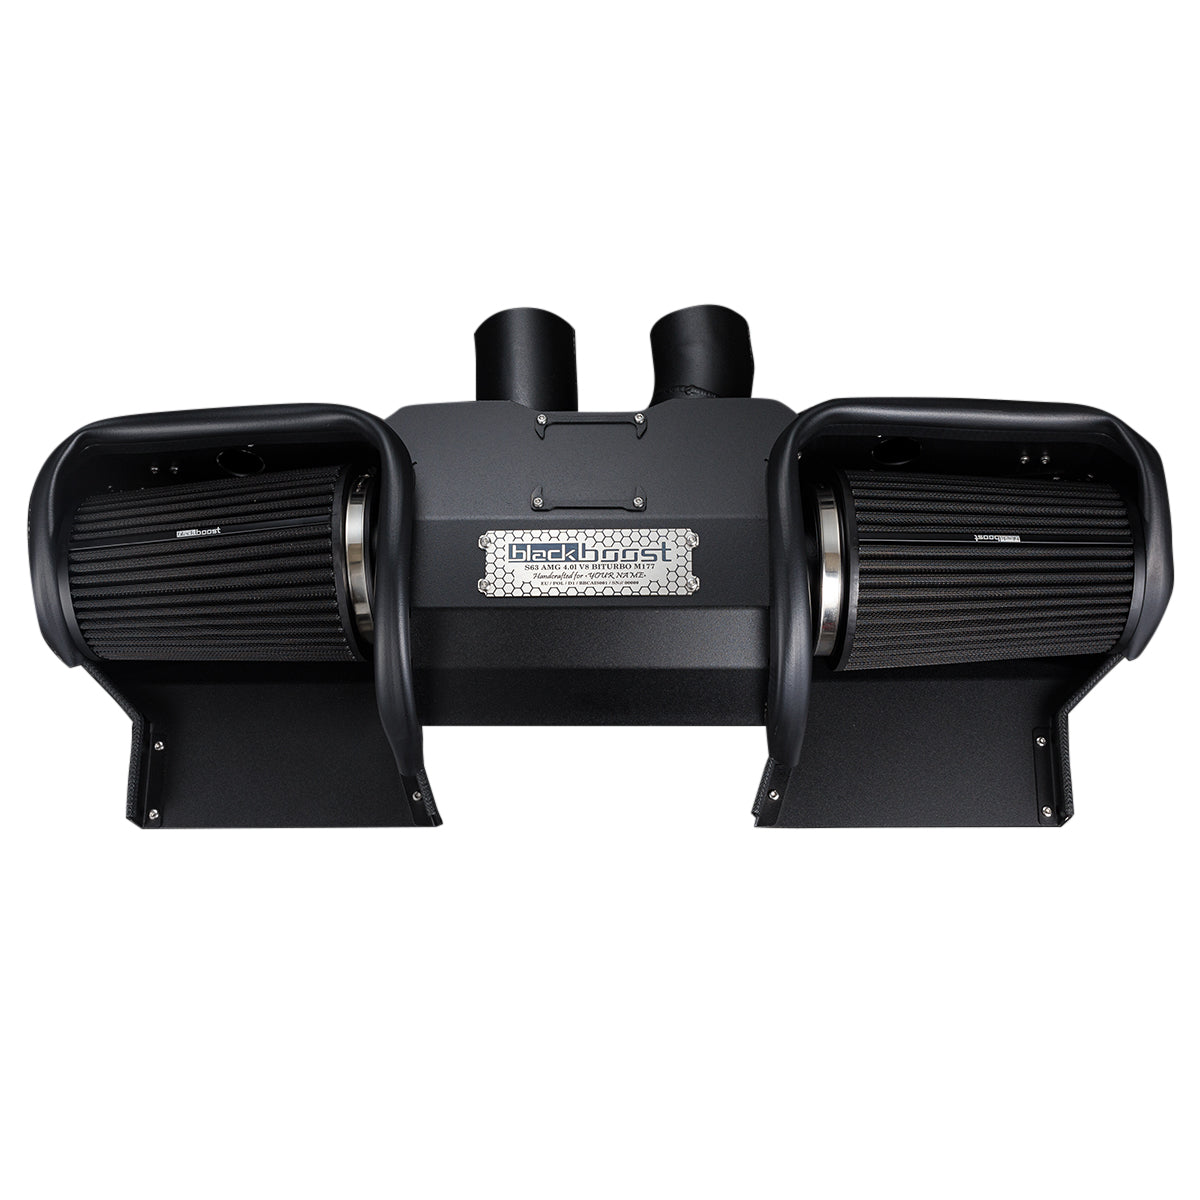 BLACKBOOST BBCAIS004 Cold Air Intake System for Mercedes Benz S63 (W222) / S500/550 (W222) Photo-0 